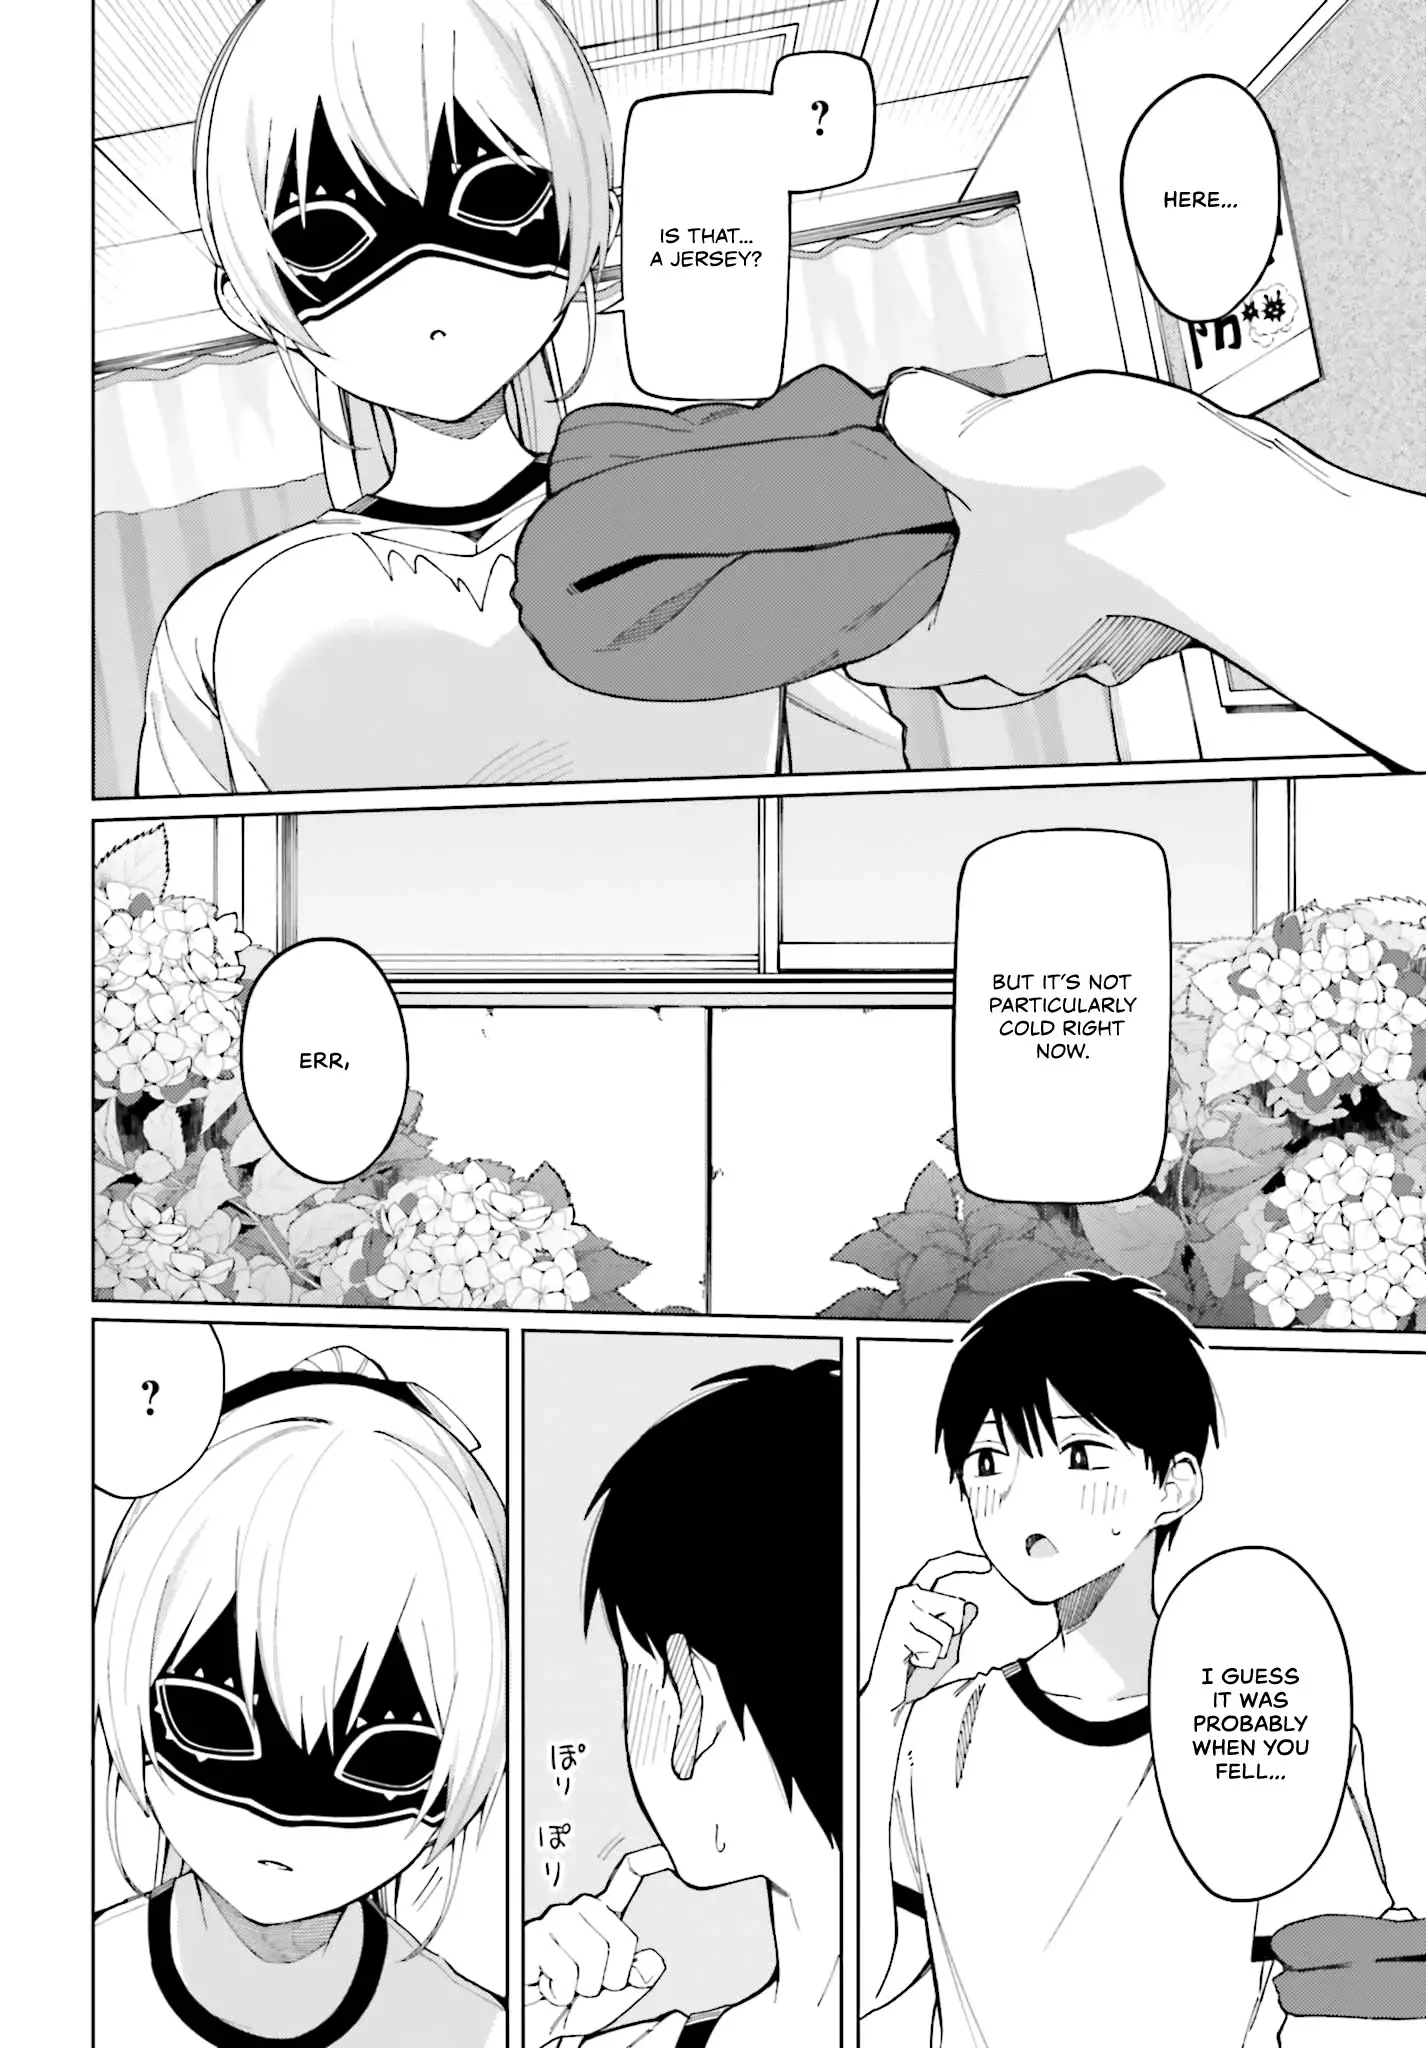 I Don't Understand Shirogane-San's Facial Expression At All - 2 page 18